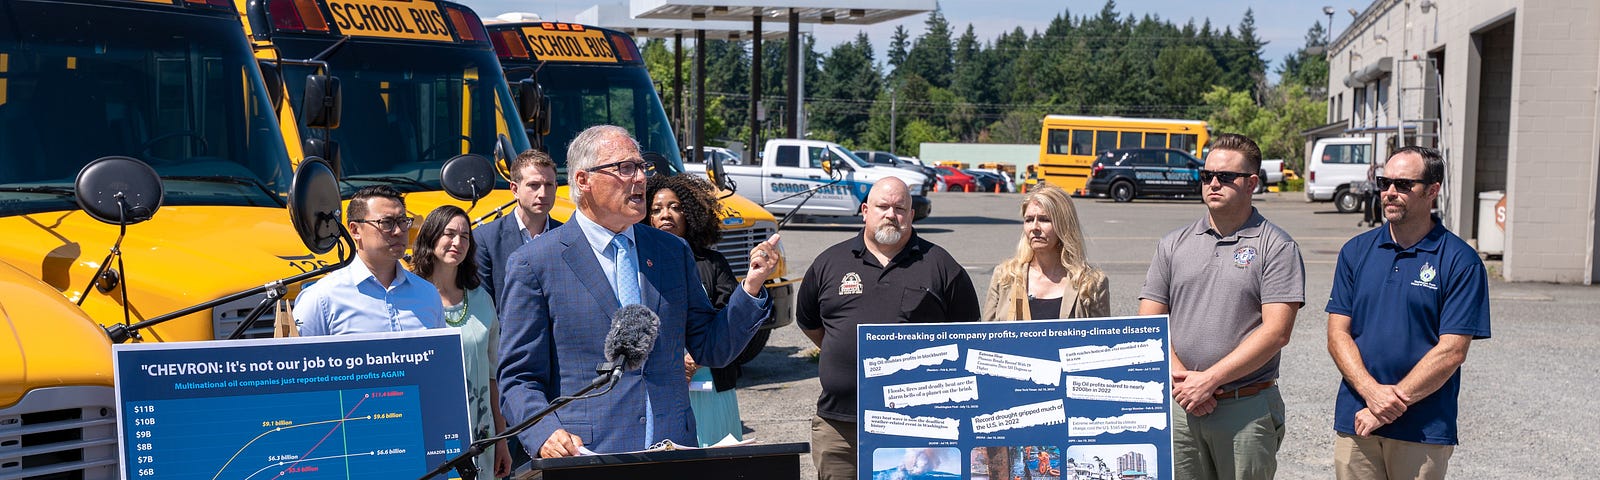 Photo of Gov. Inslee standing outdoors at a podium with a small group of people behind him. Behind the group are new electric school buses, and next to the podium are two posters — one showing increasing oil company profits and another showing a collage of headlines about oil company profits and climate-related weather events and disasters.